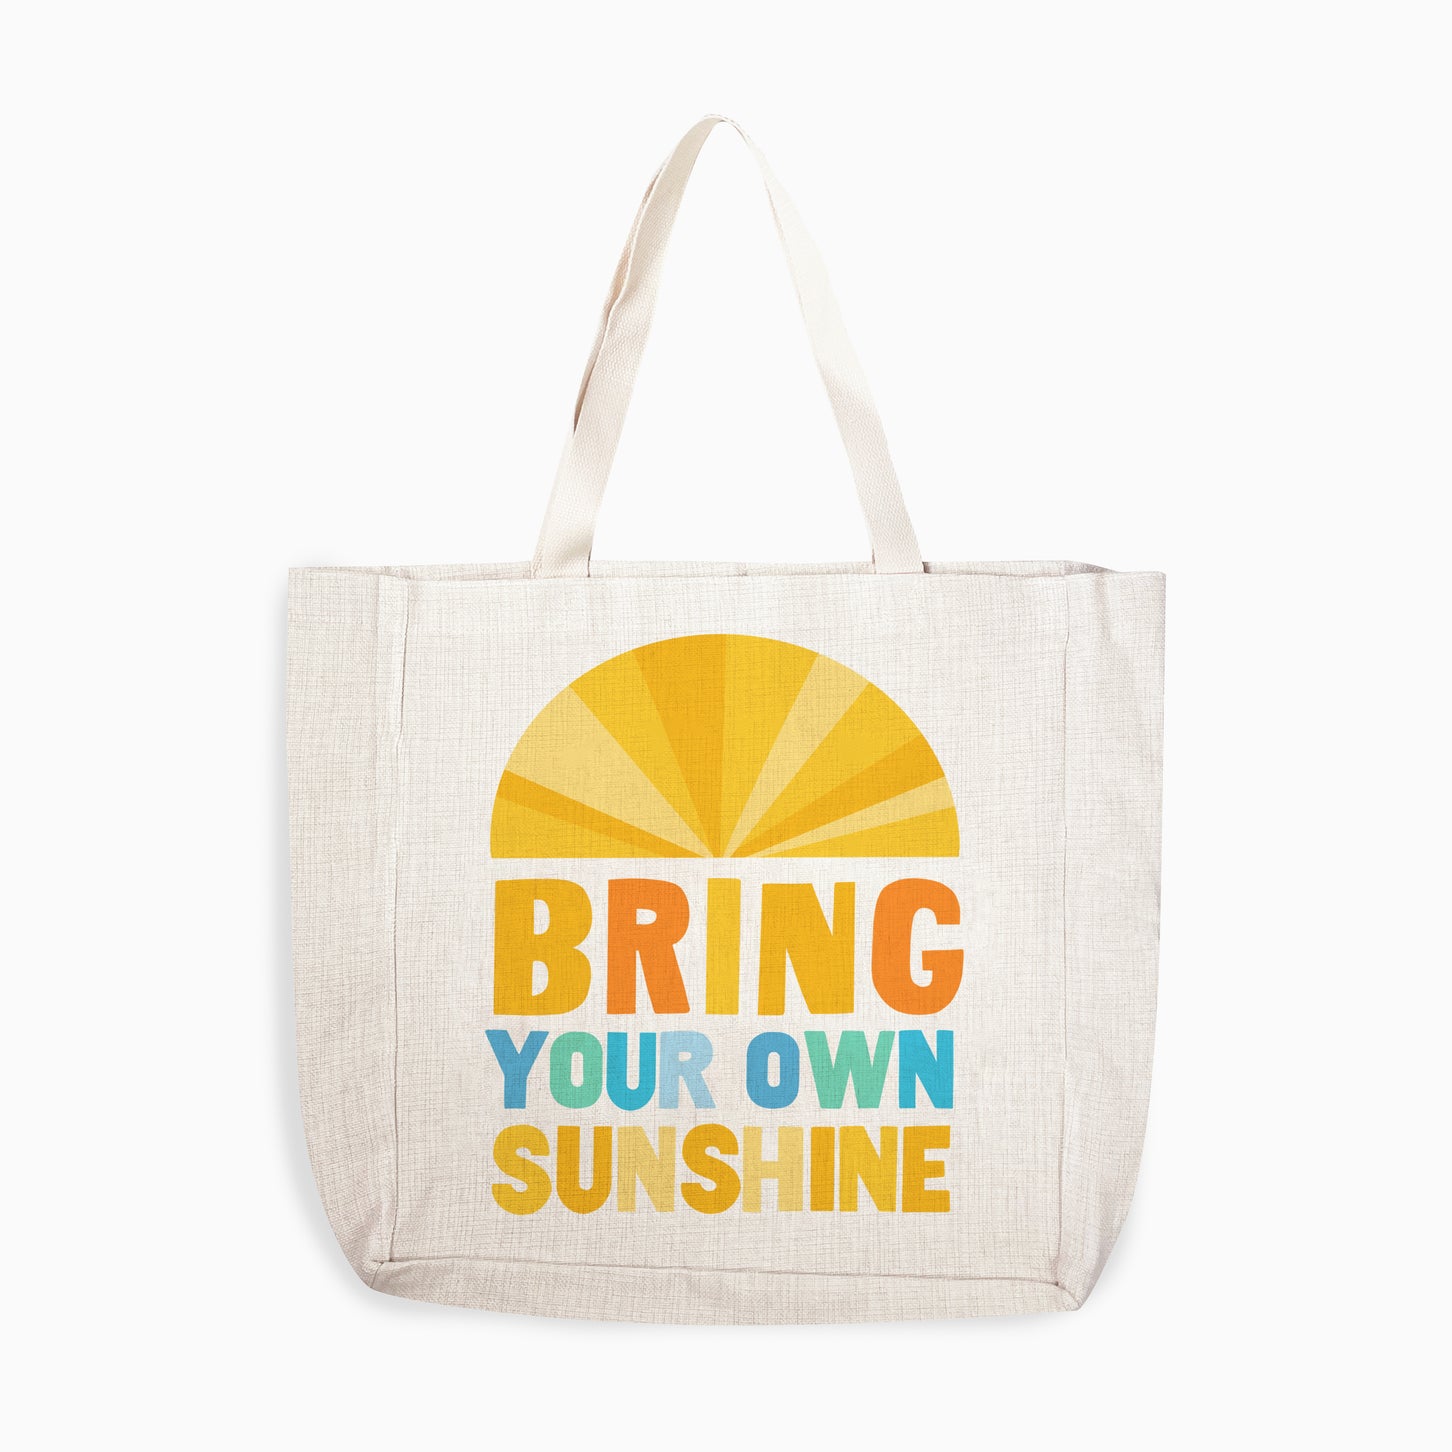 Bring Your Own Sunshine Shopping Bag